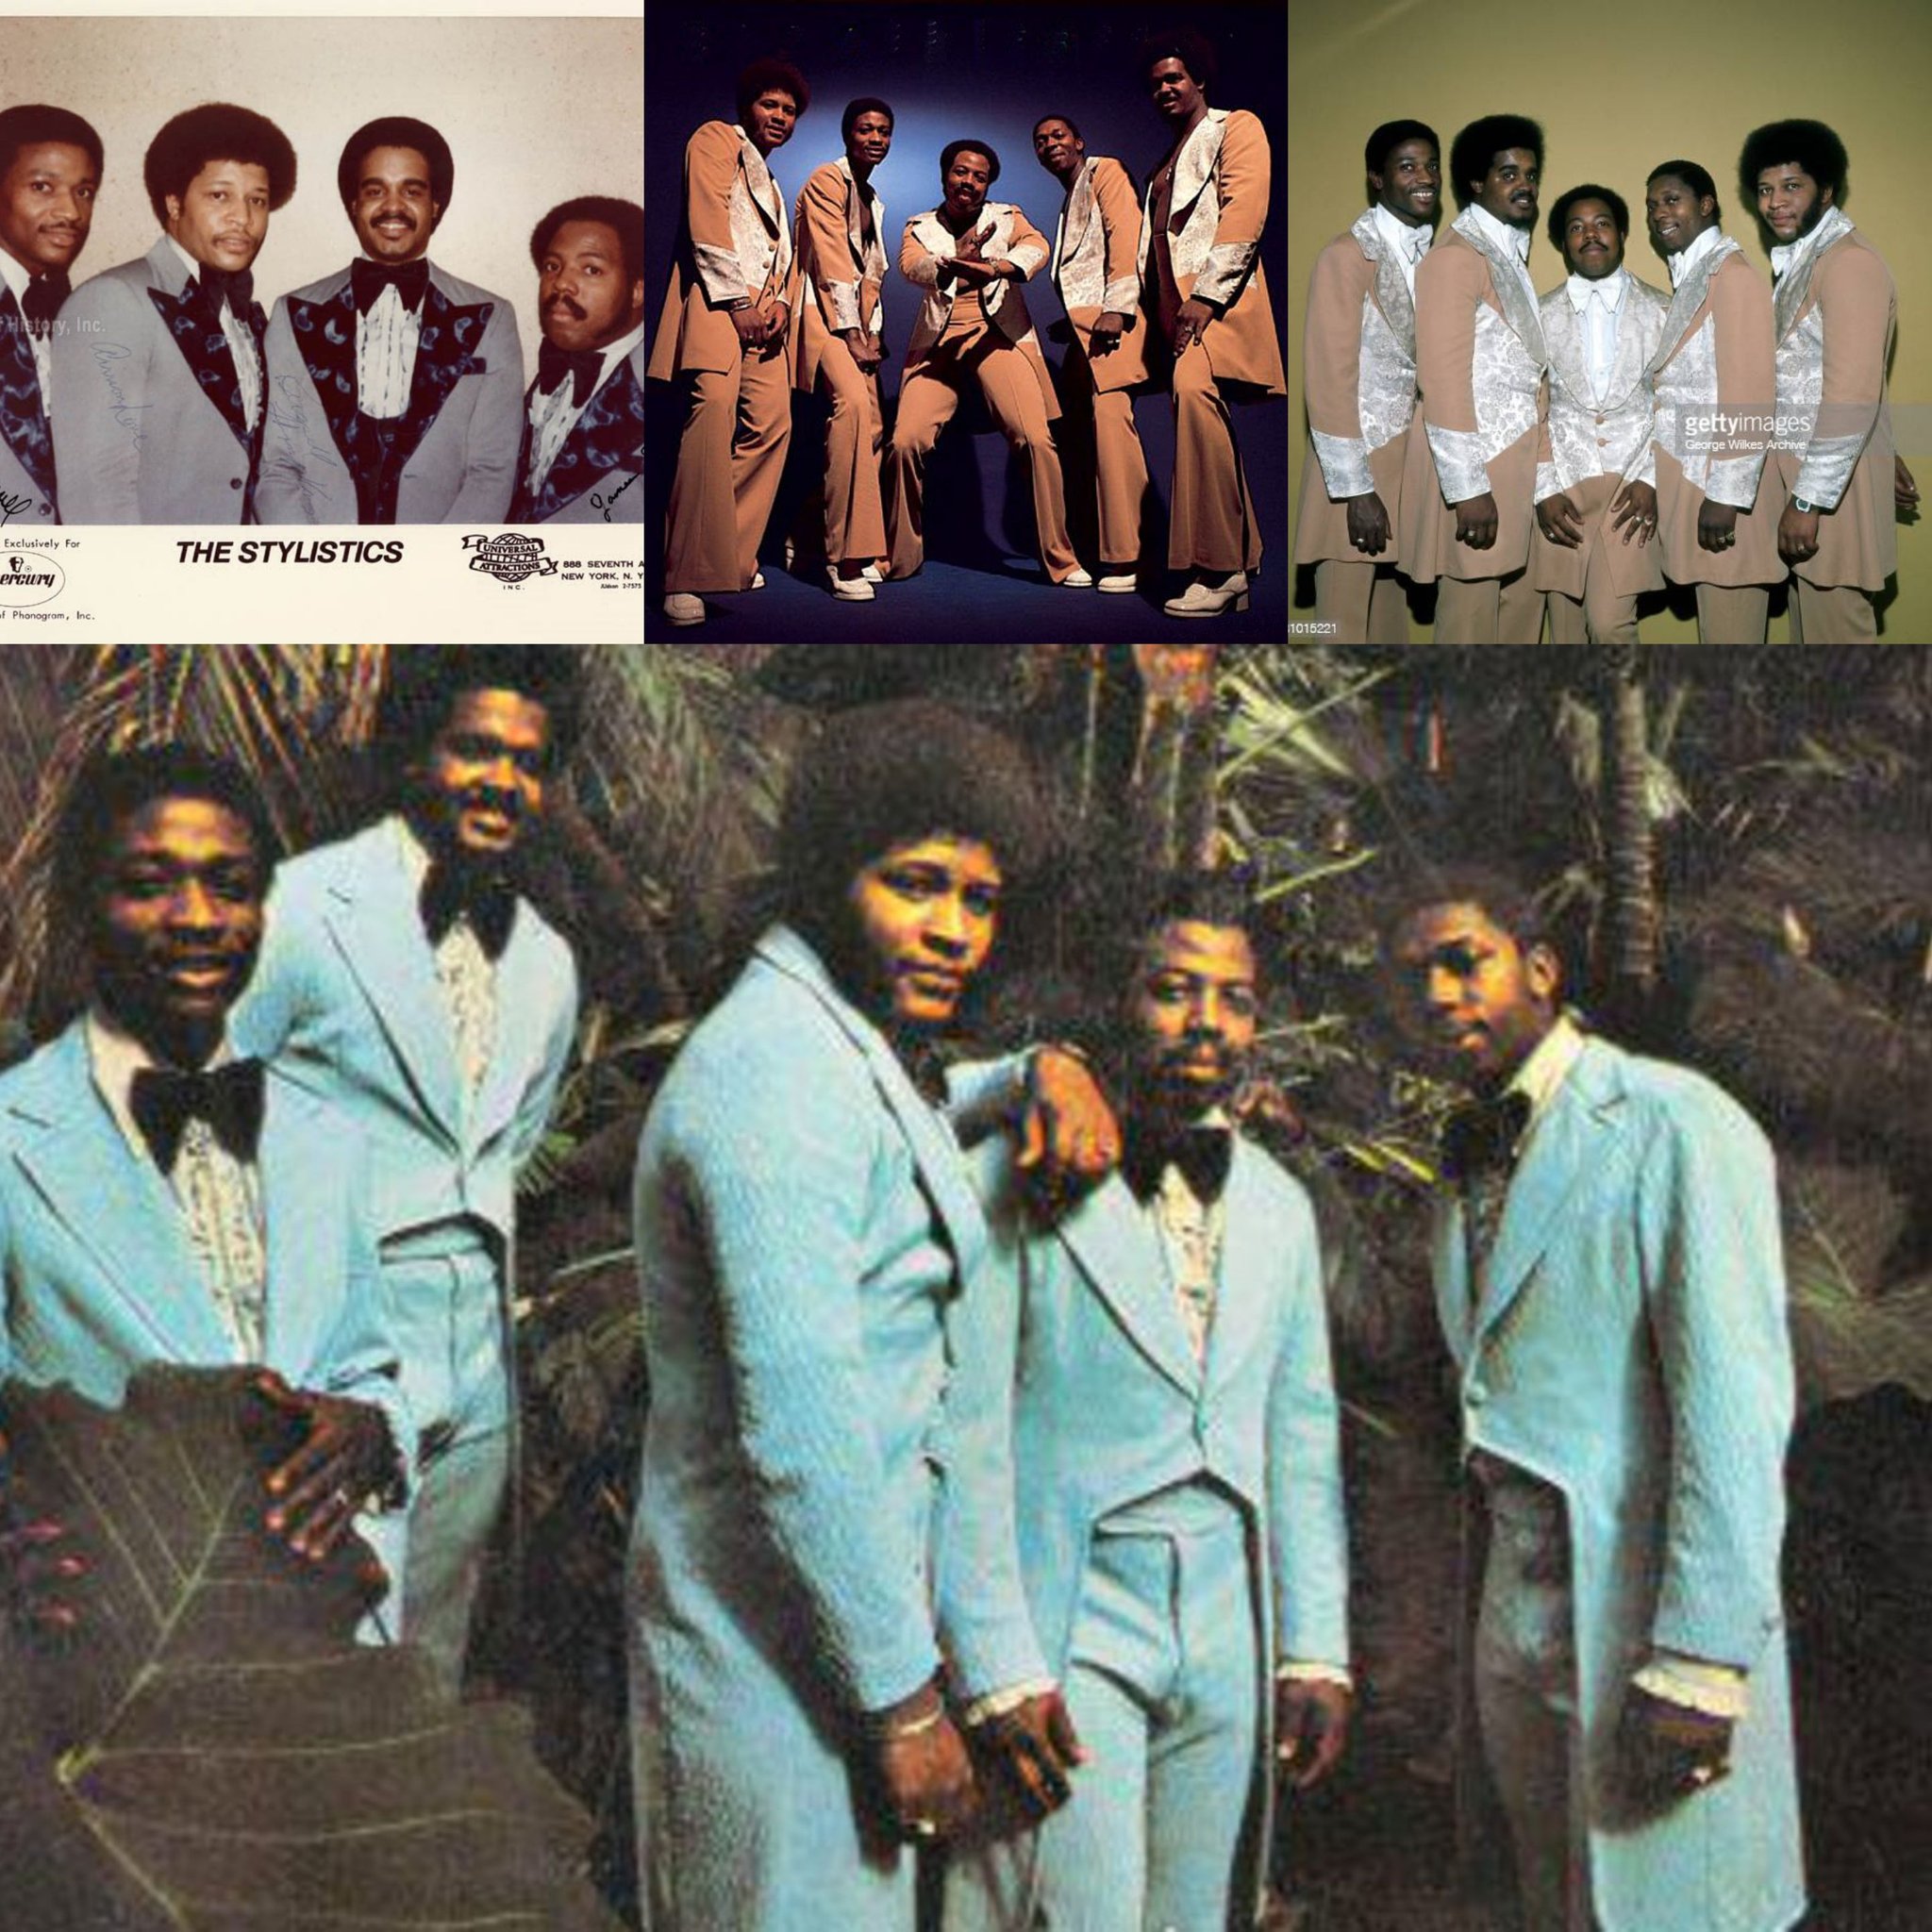 HAPPY 72ND BIRTHDAY RUSSELL THOMPKINS JR. FROM THE STYLISTICS. 